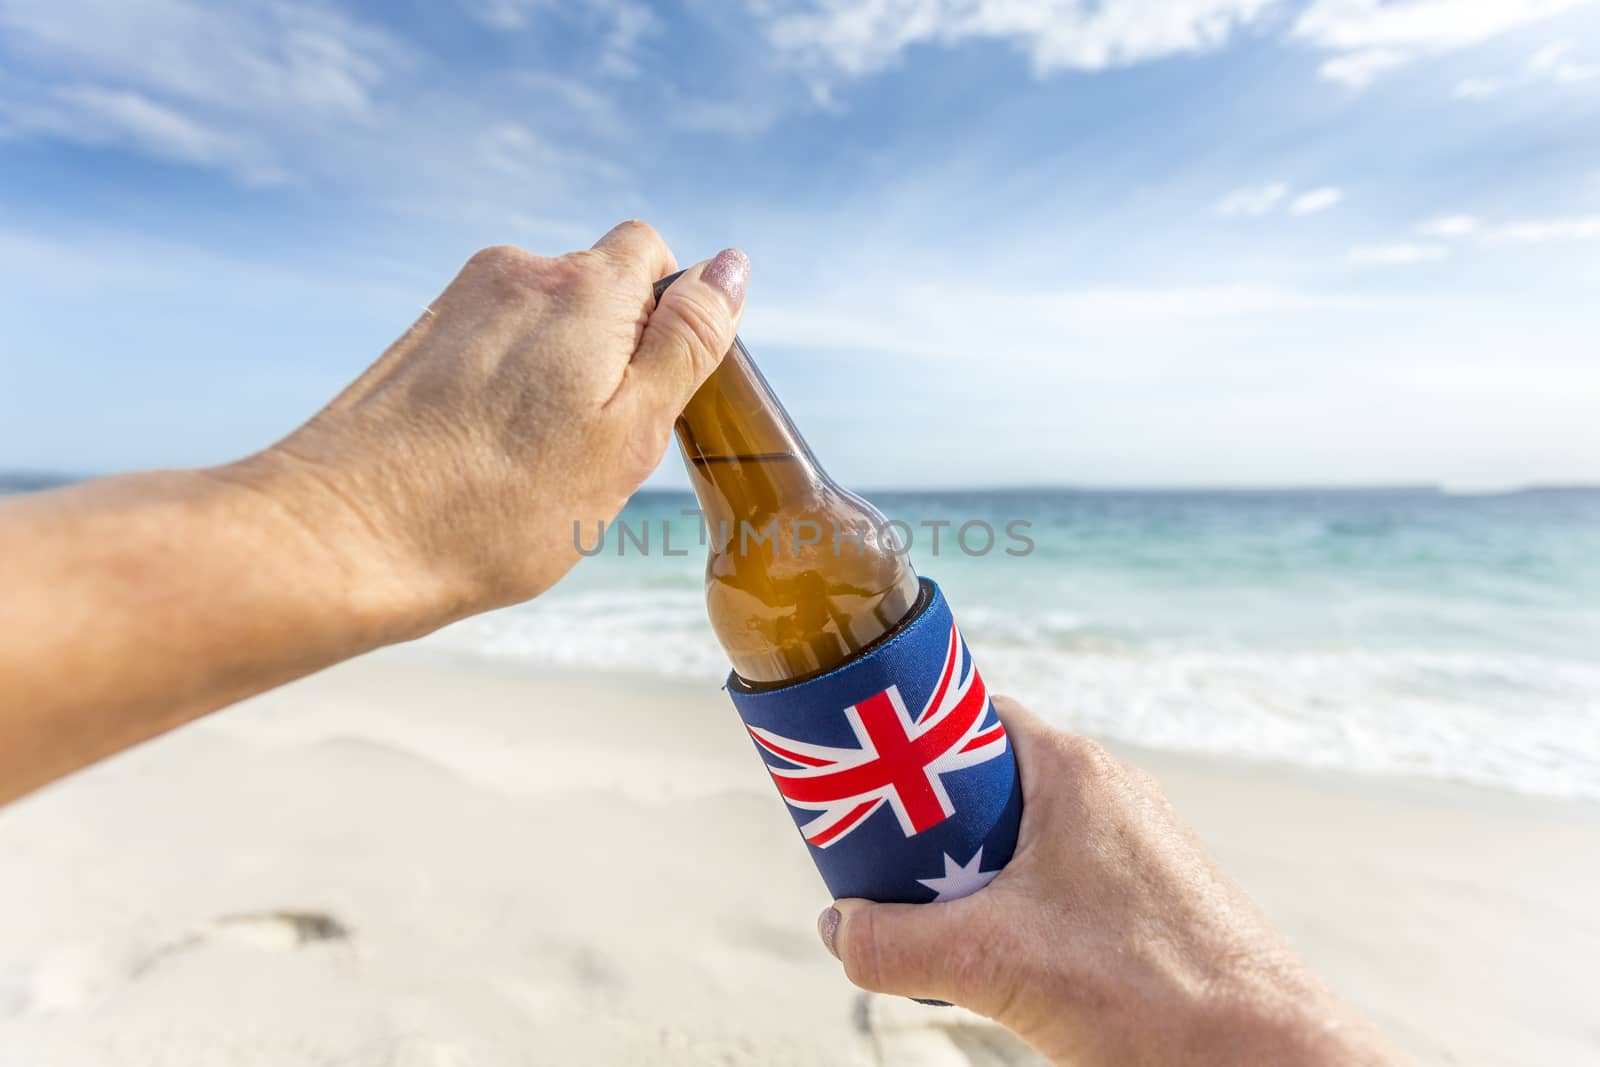 Aussie culture, hands open a cold beer on the beach in summer.  Australian culture, beach party, barbeque, celebrate, holiday, chilling out